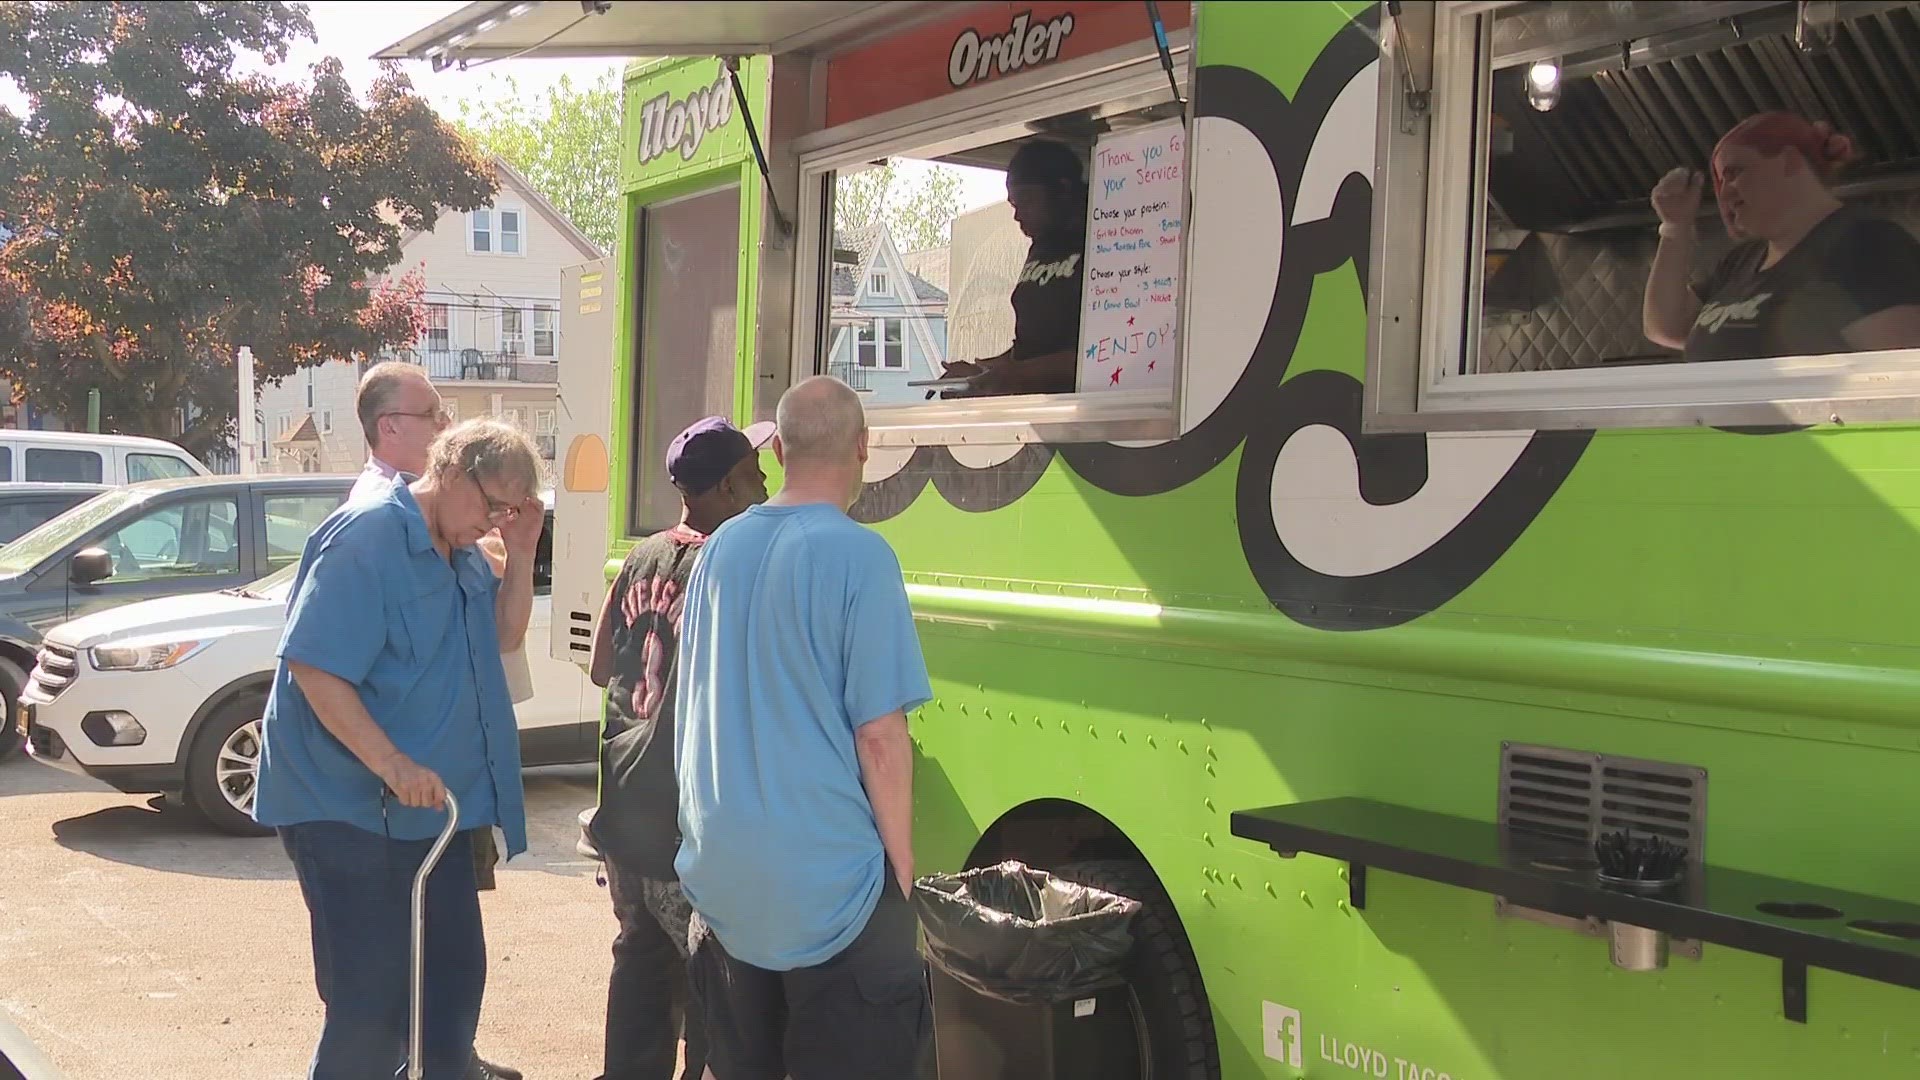 Lloyd Taco Factory brought their food truck filled with tacos and burritos to feed veterans at the Altamont Veteran's Program on Wyoming Avenue